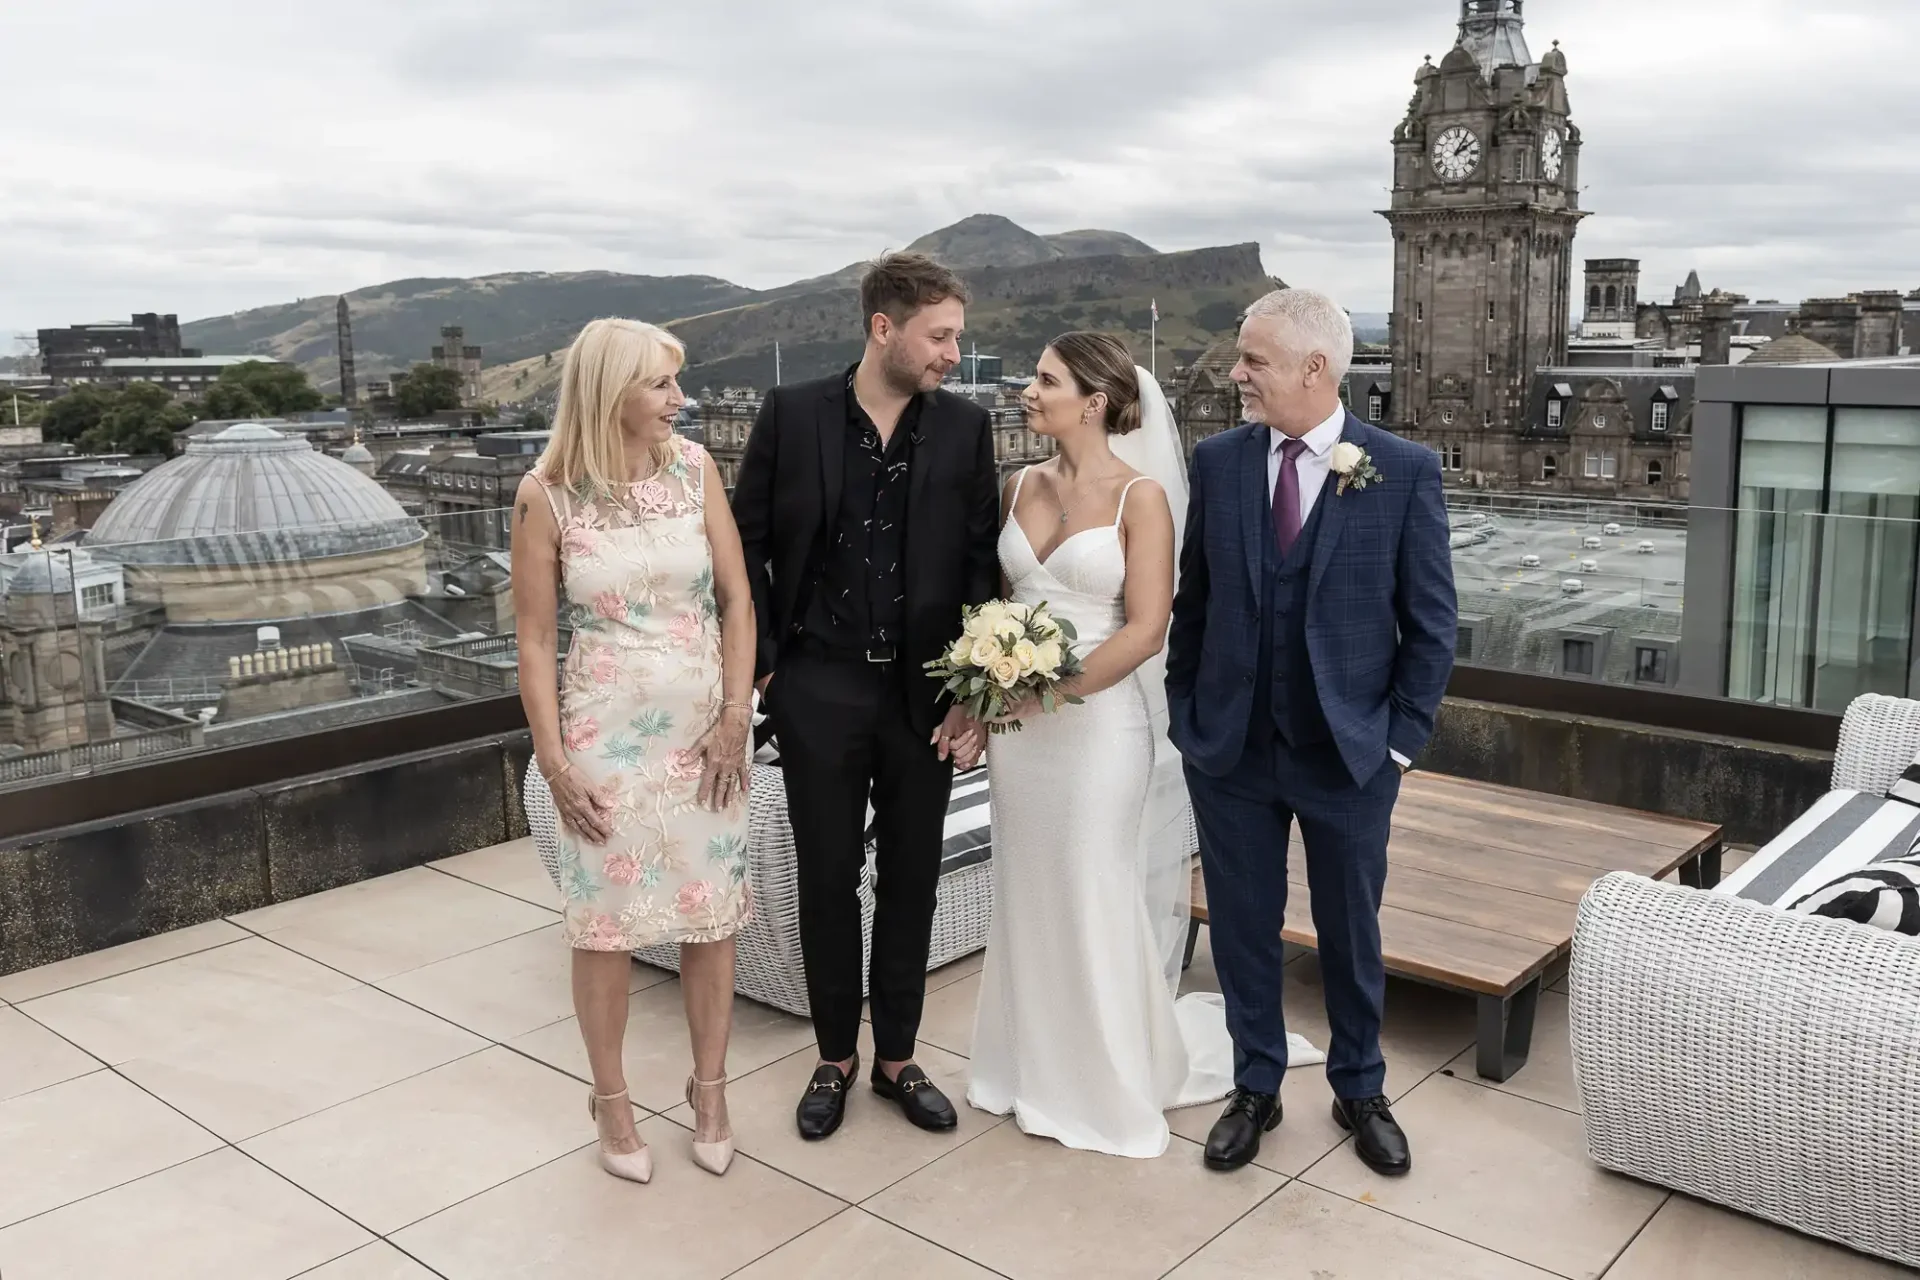 A newlywed couple with their parents on a rooftop, cityscape in the background, all smiling and dressed formally.